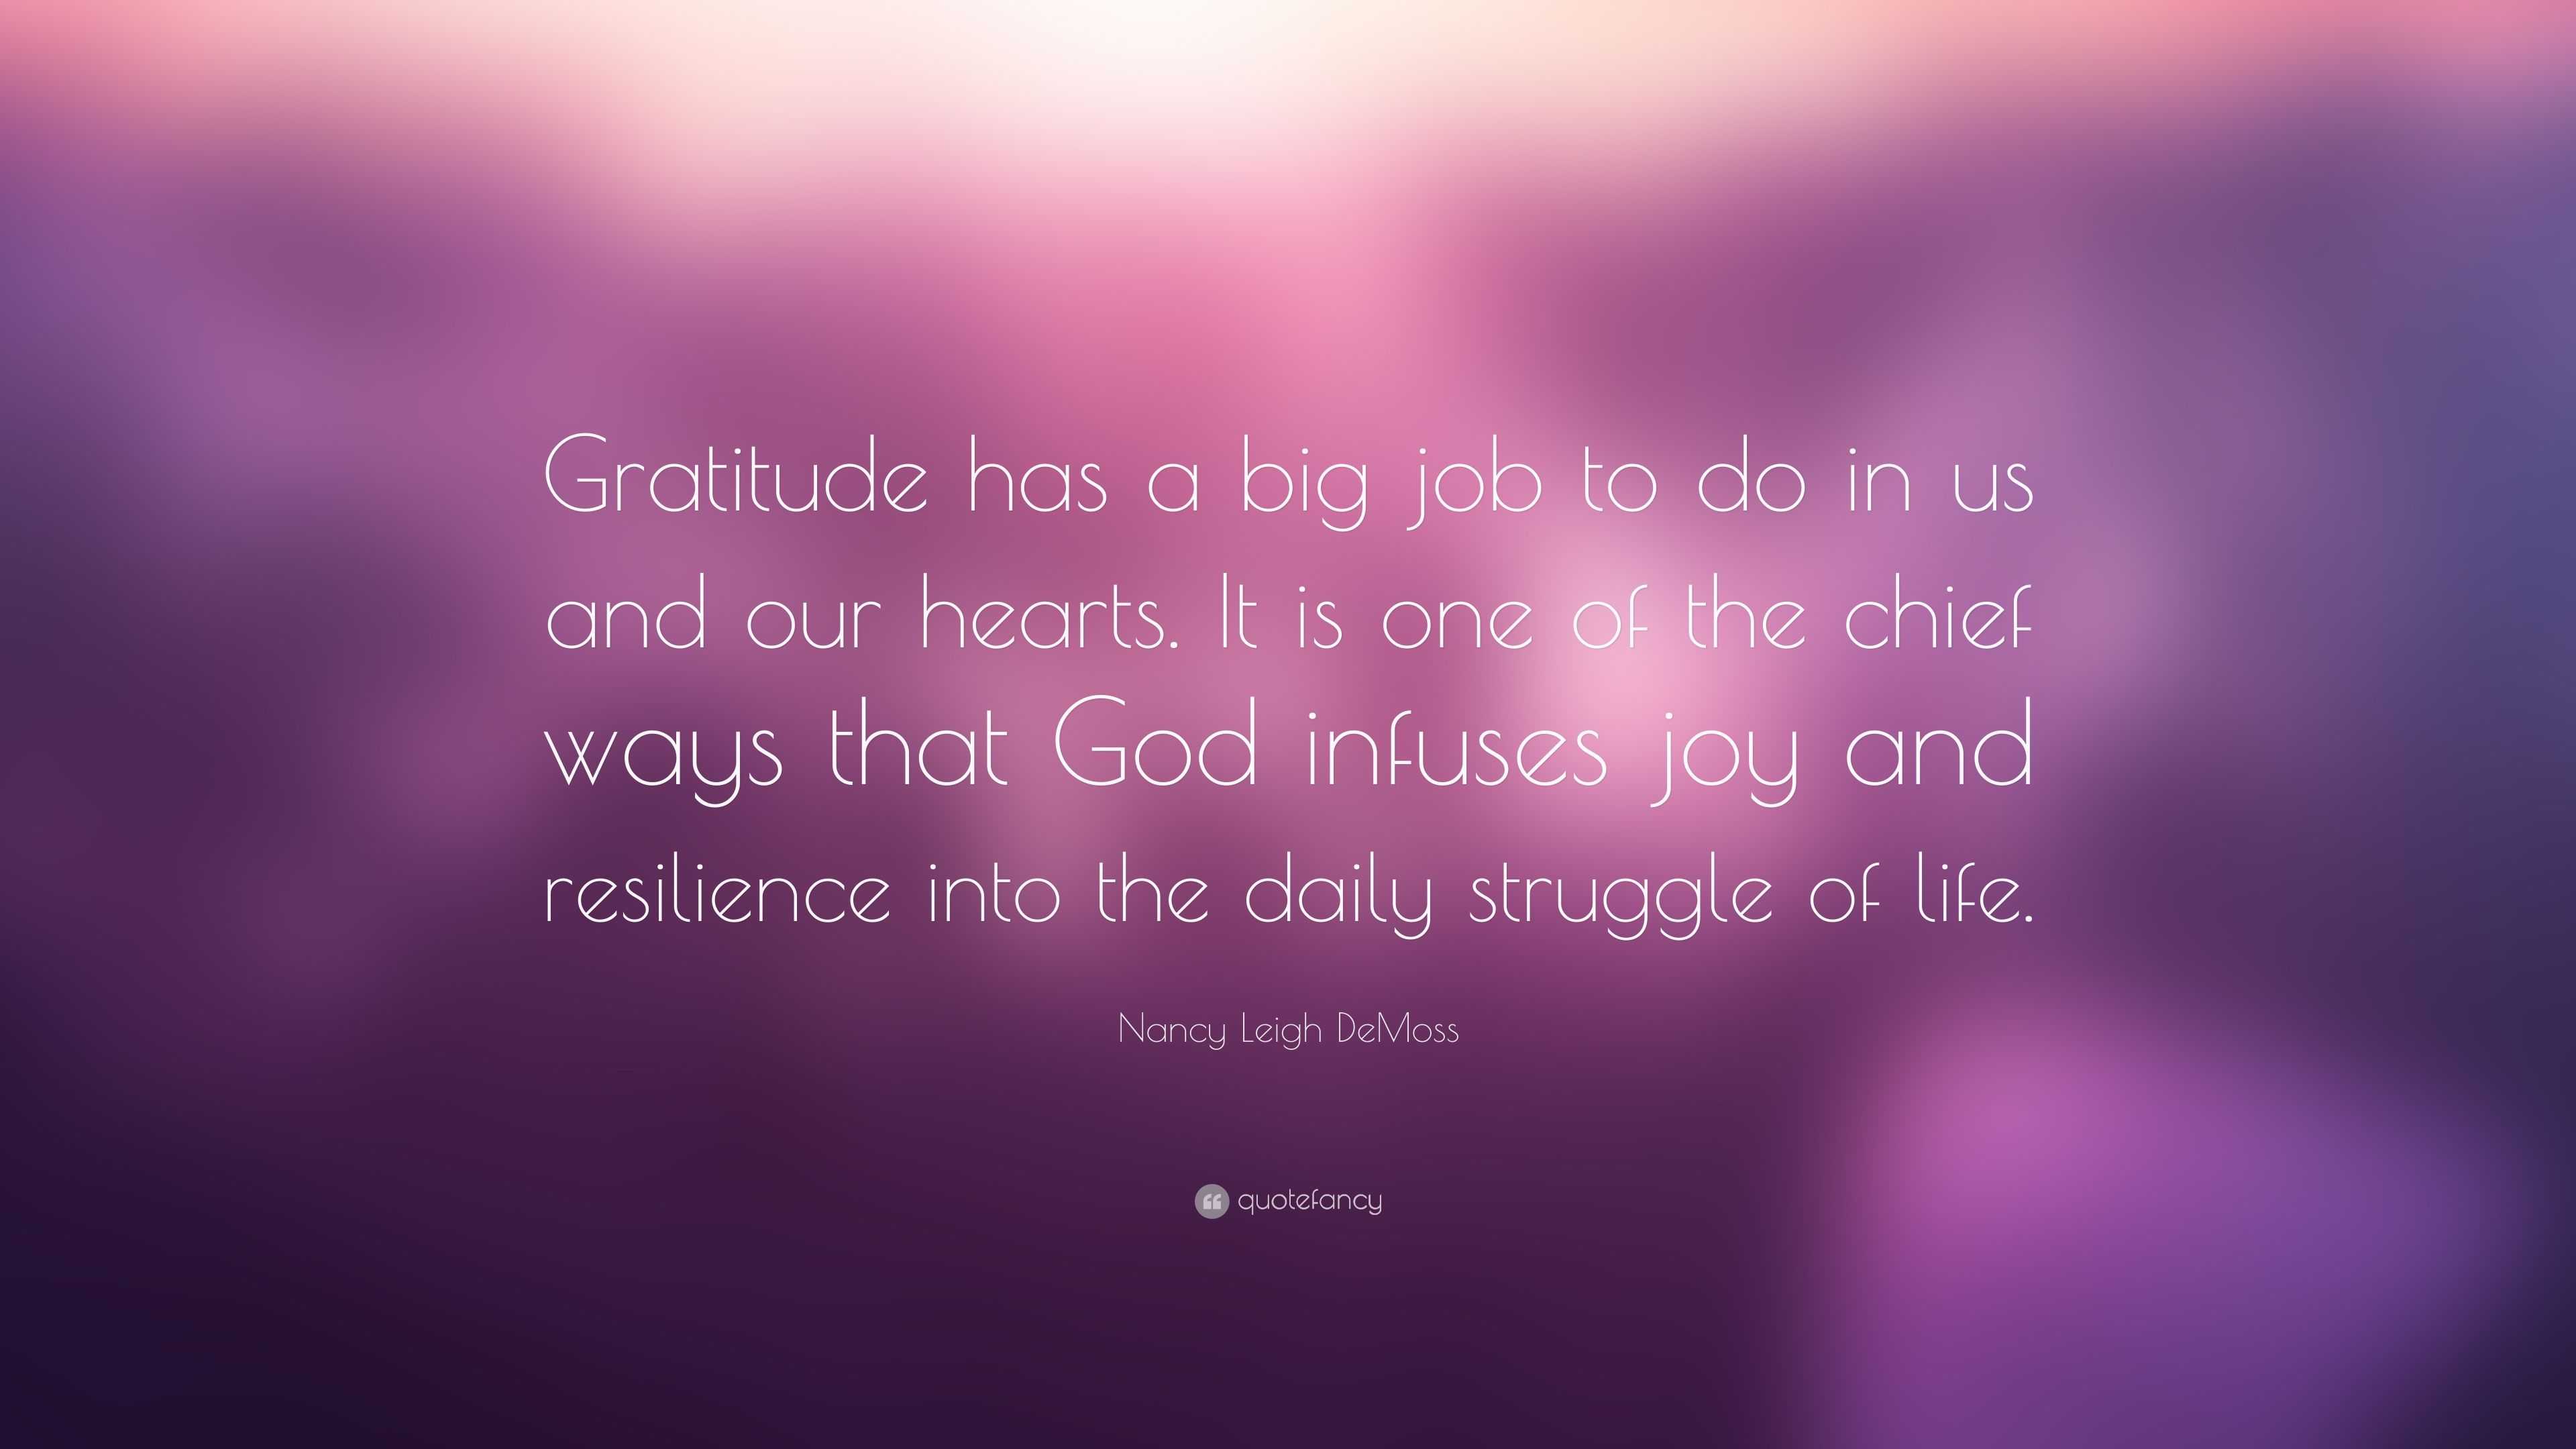 Nancy Leigh DeMoss Quote: “Gratitude has a big job to do in us and our ...